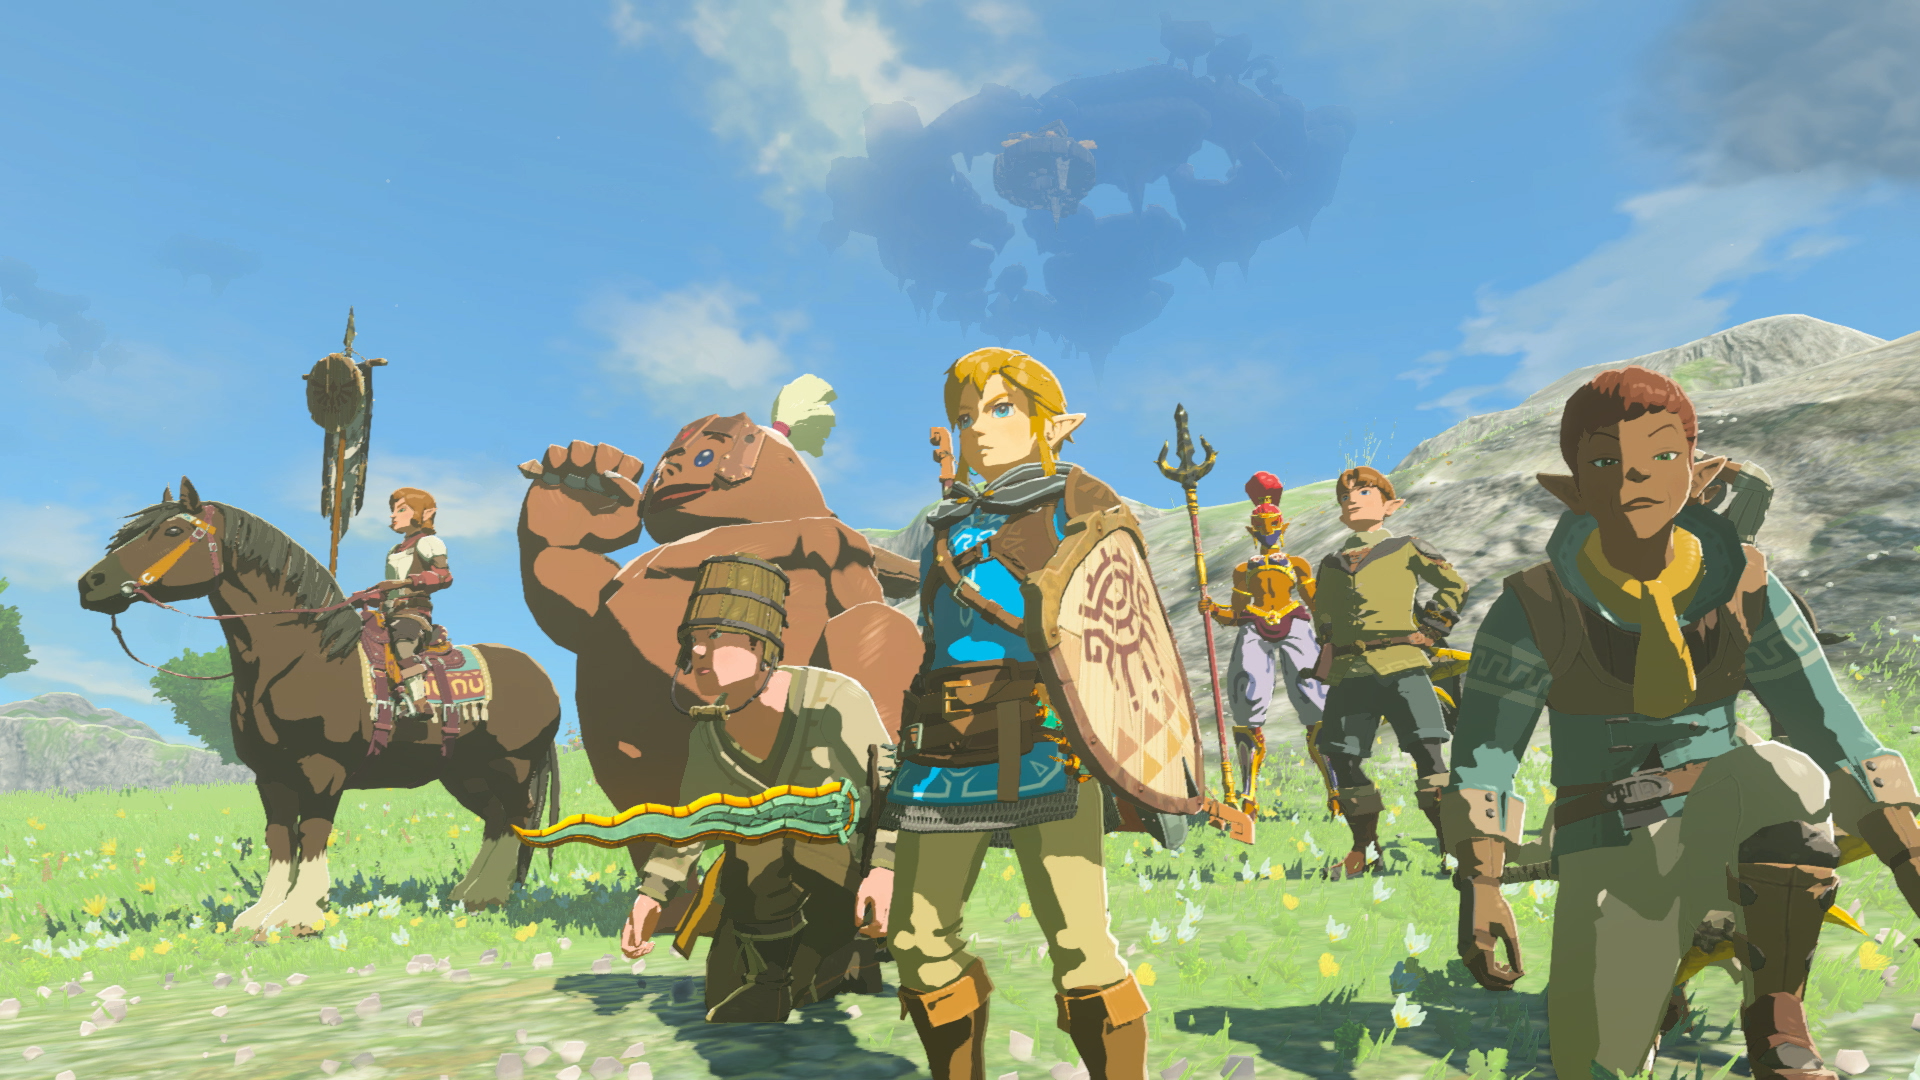 Link battling a monster stronghold with hylians, gerudo, and gorons 